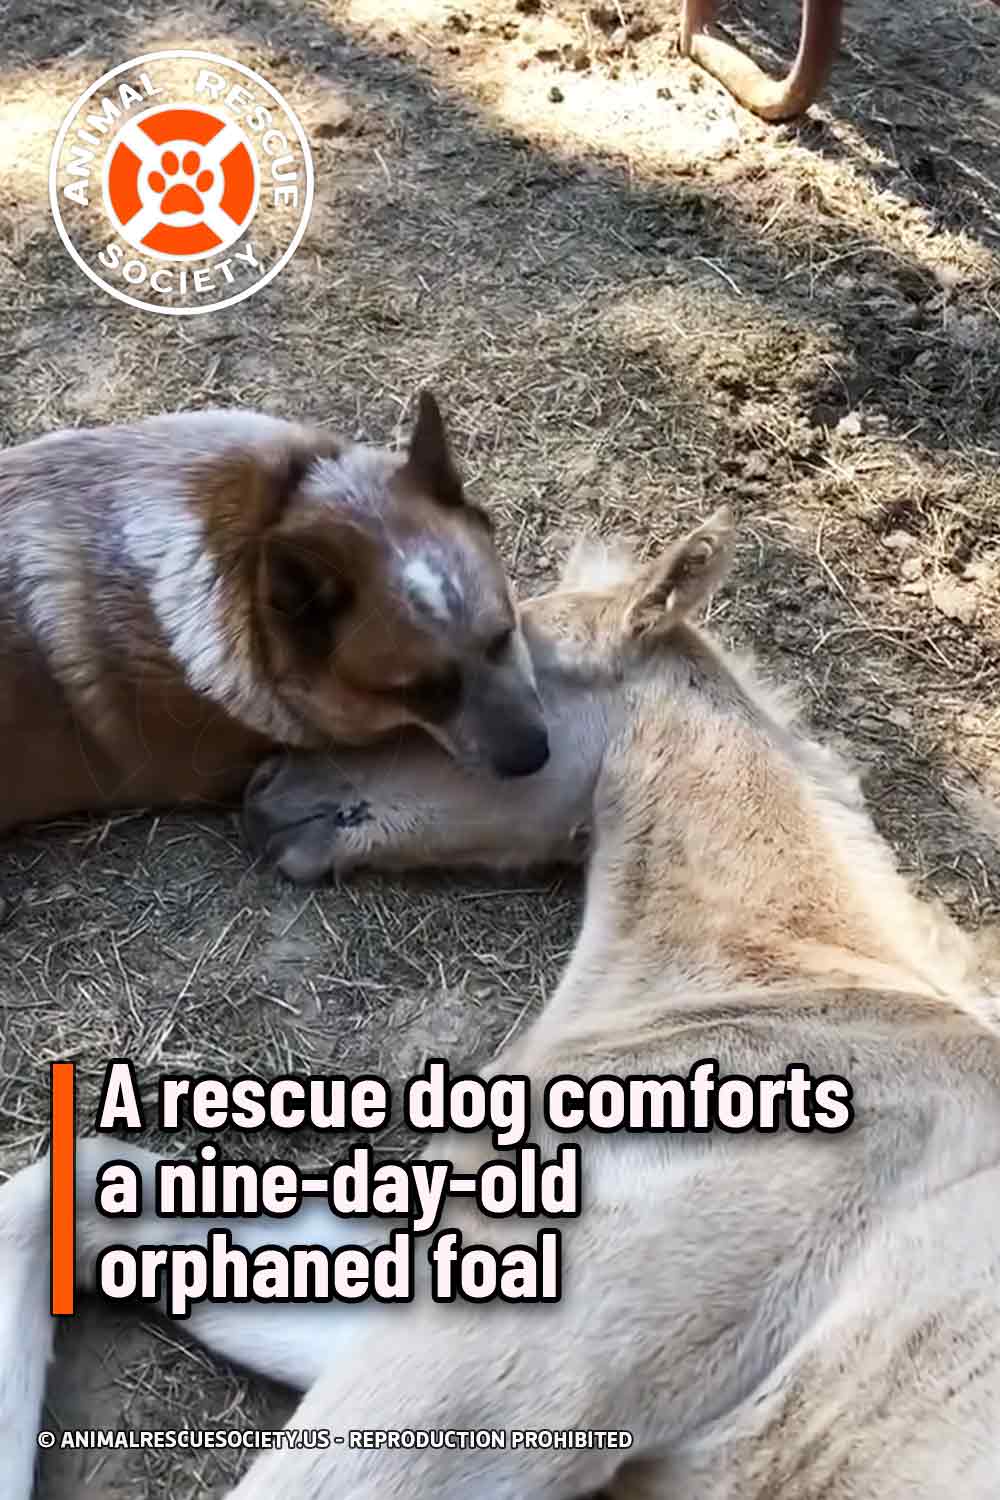 A rescue dog comforts a nine-day-old orphaned foal